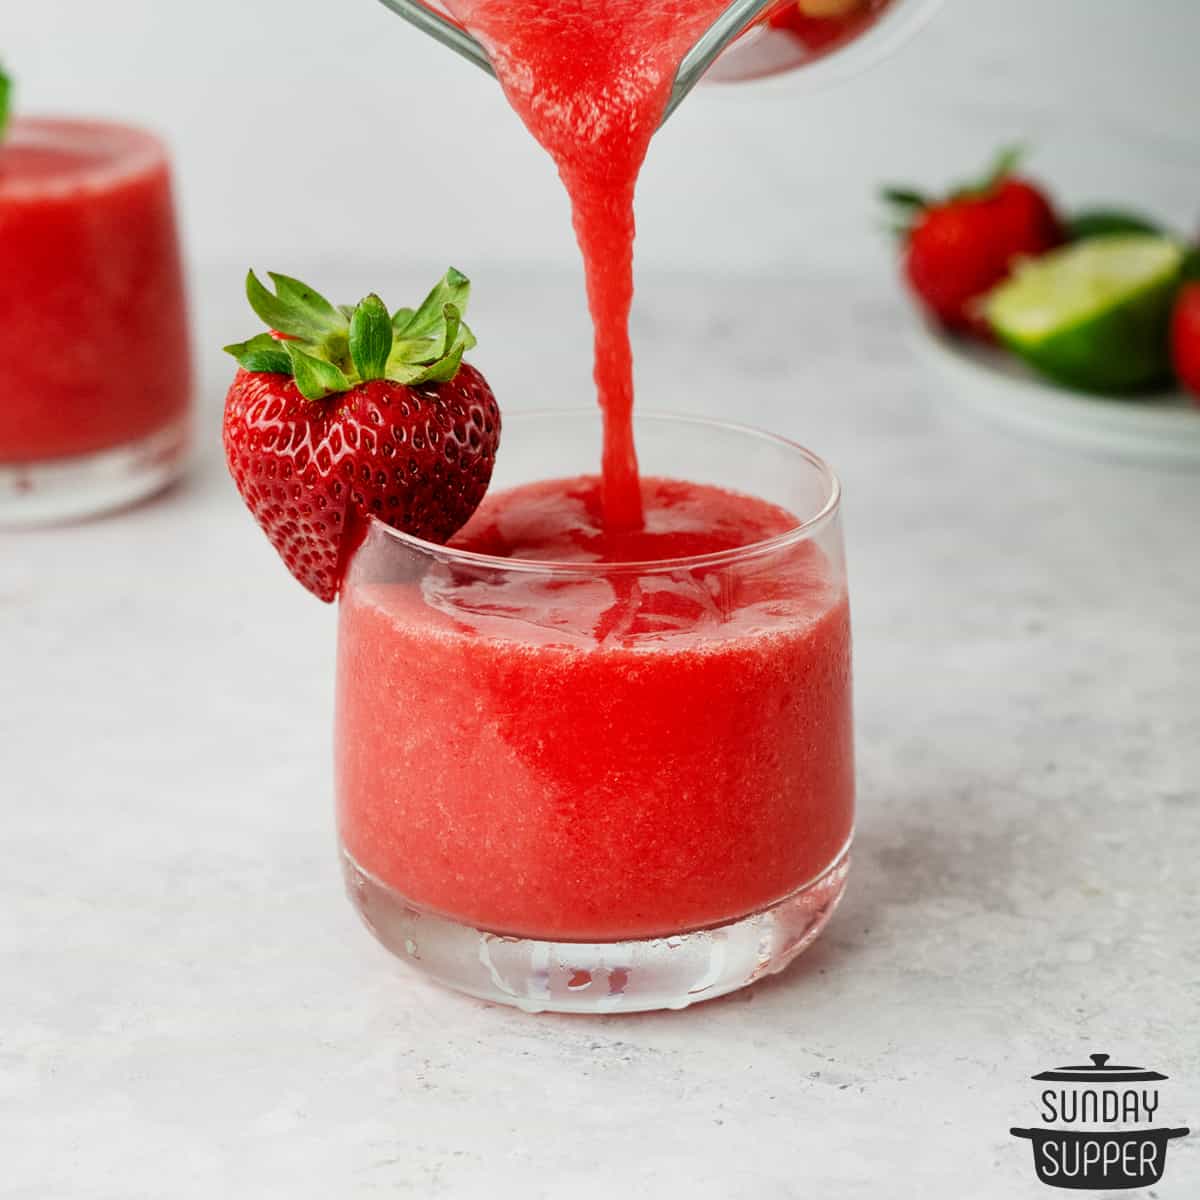 pouring strawberry daiquiri in a clear glass with a strawberry on the rim